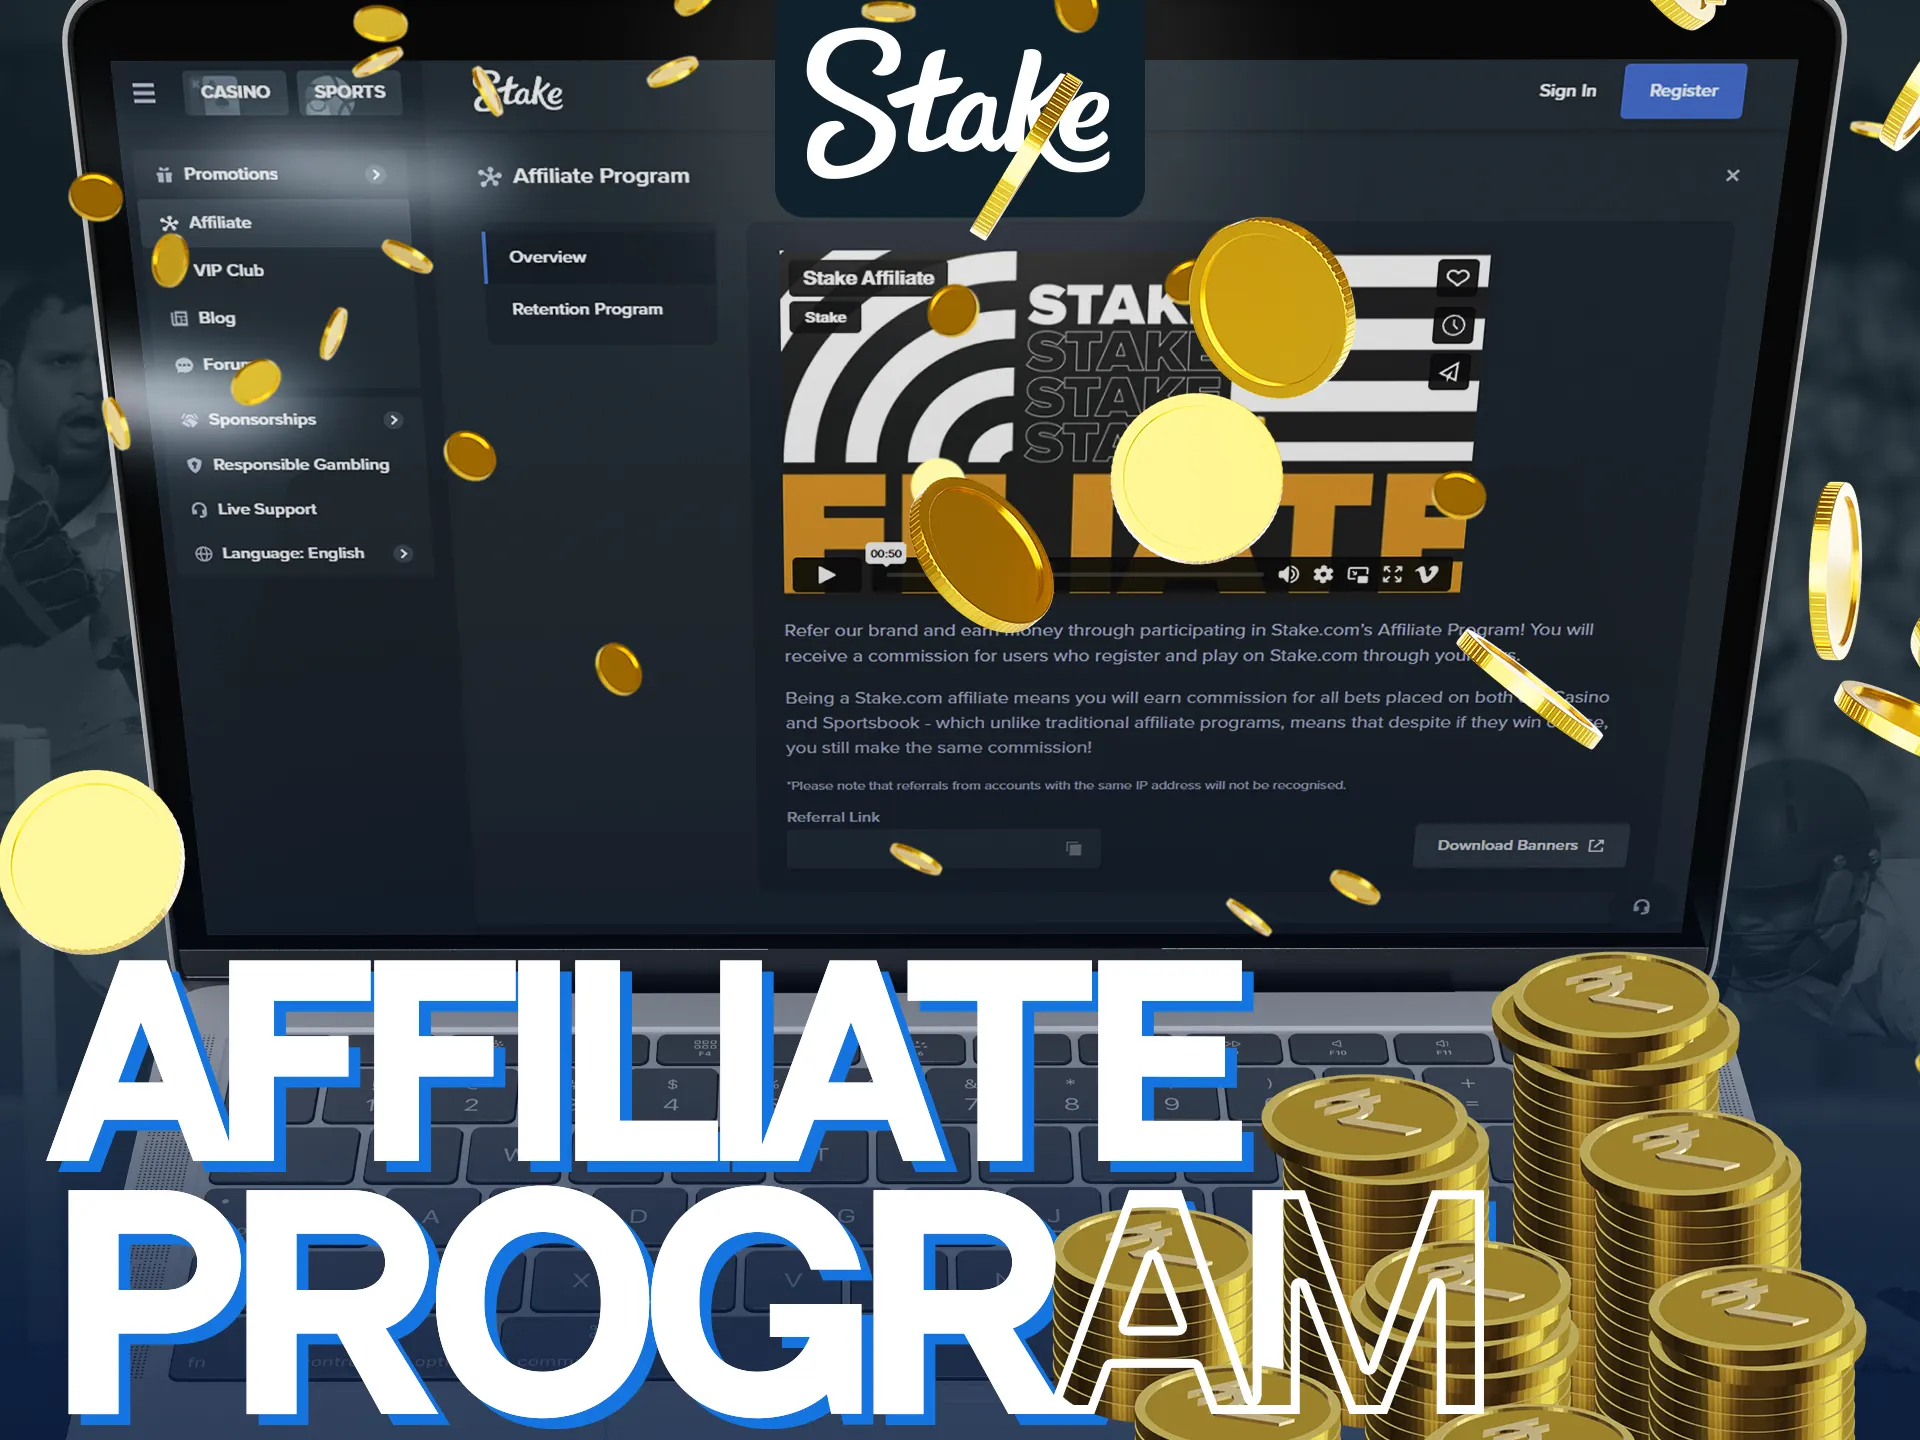 Stake Affiliate Program offers commissions for referring users.